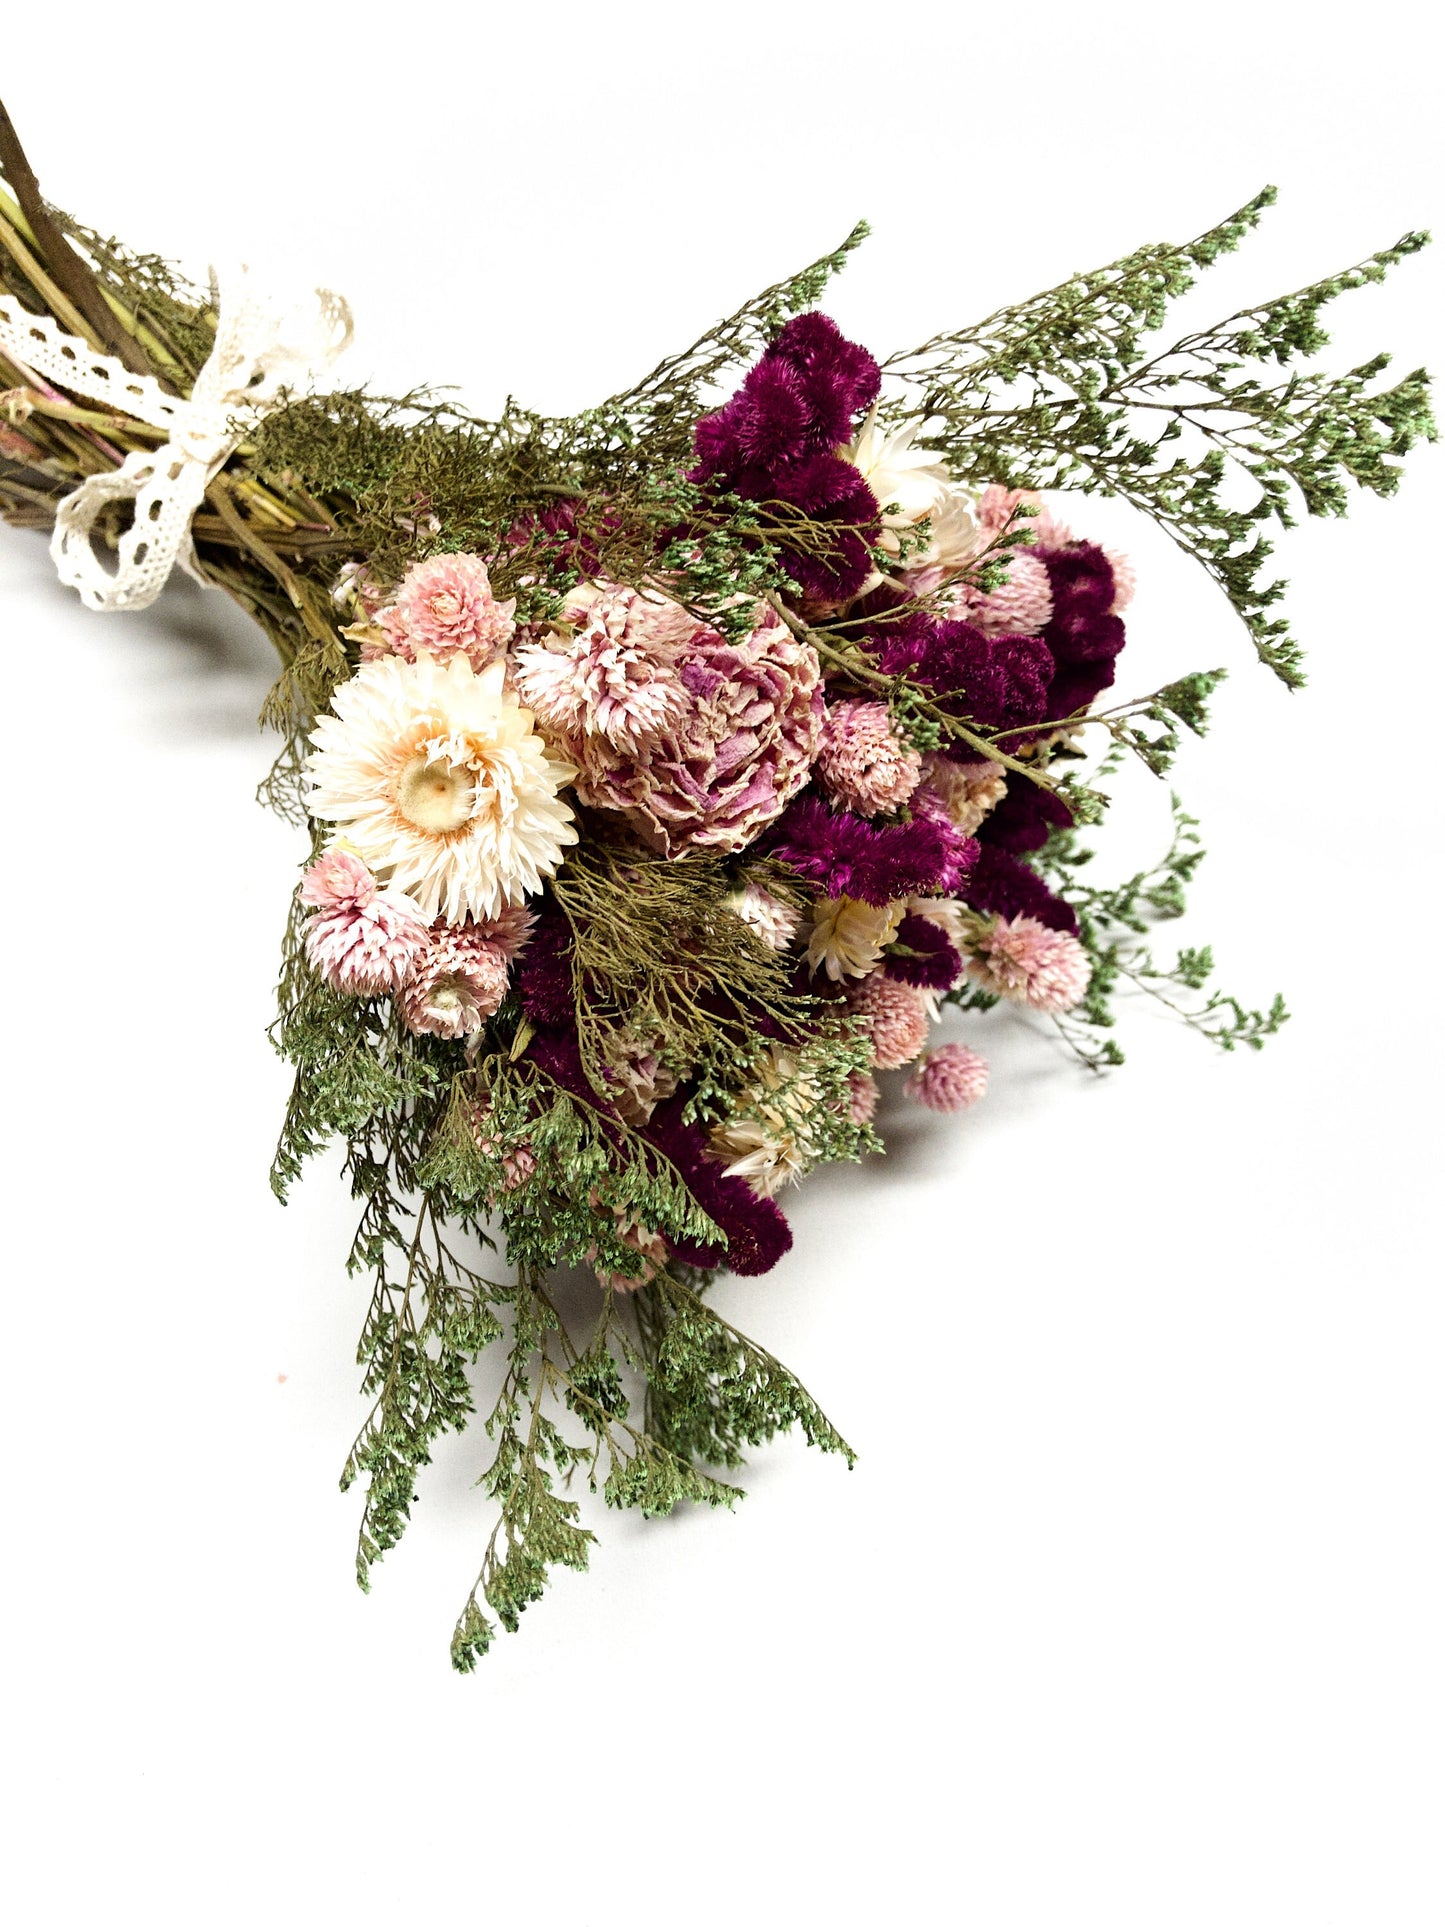 Floral Bouquet, Preserved Flower, Gift, Wedding , Anniversary gift, Coxcomb, Caspia, Strawflower, Amaranth, Peony, Pink, Green, Bridal